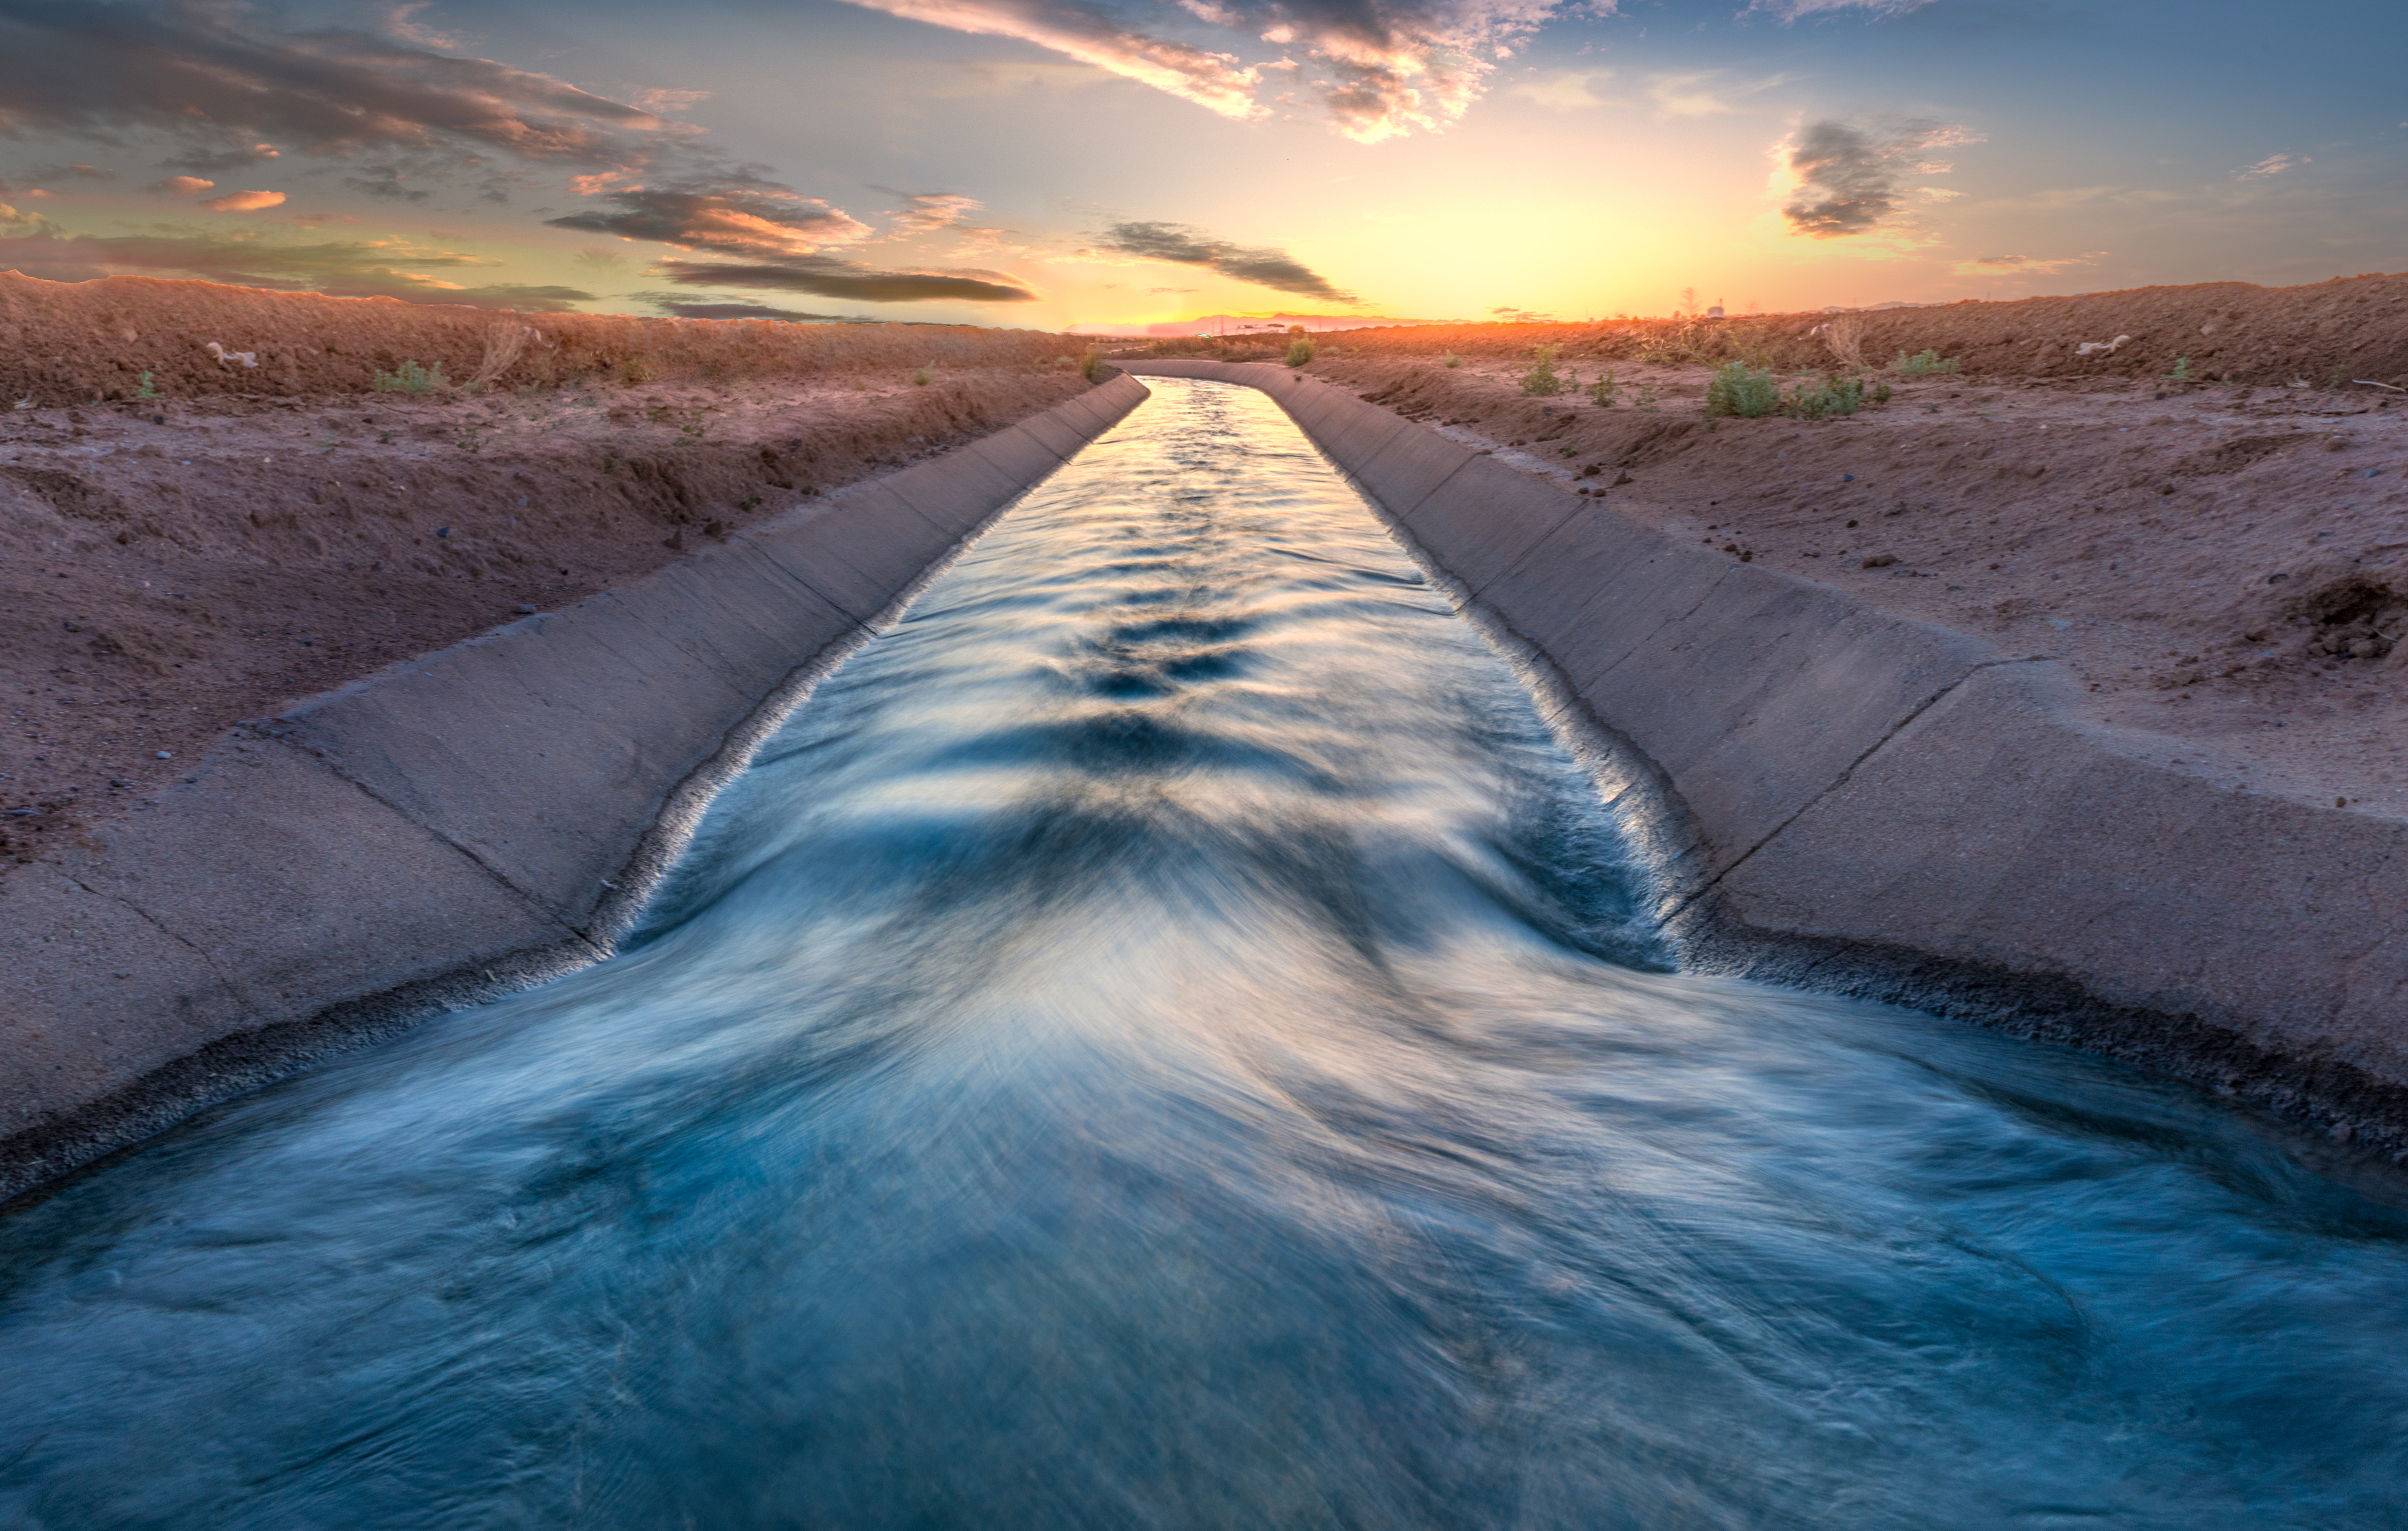 A canal in the desert of Arizona